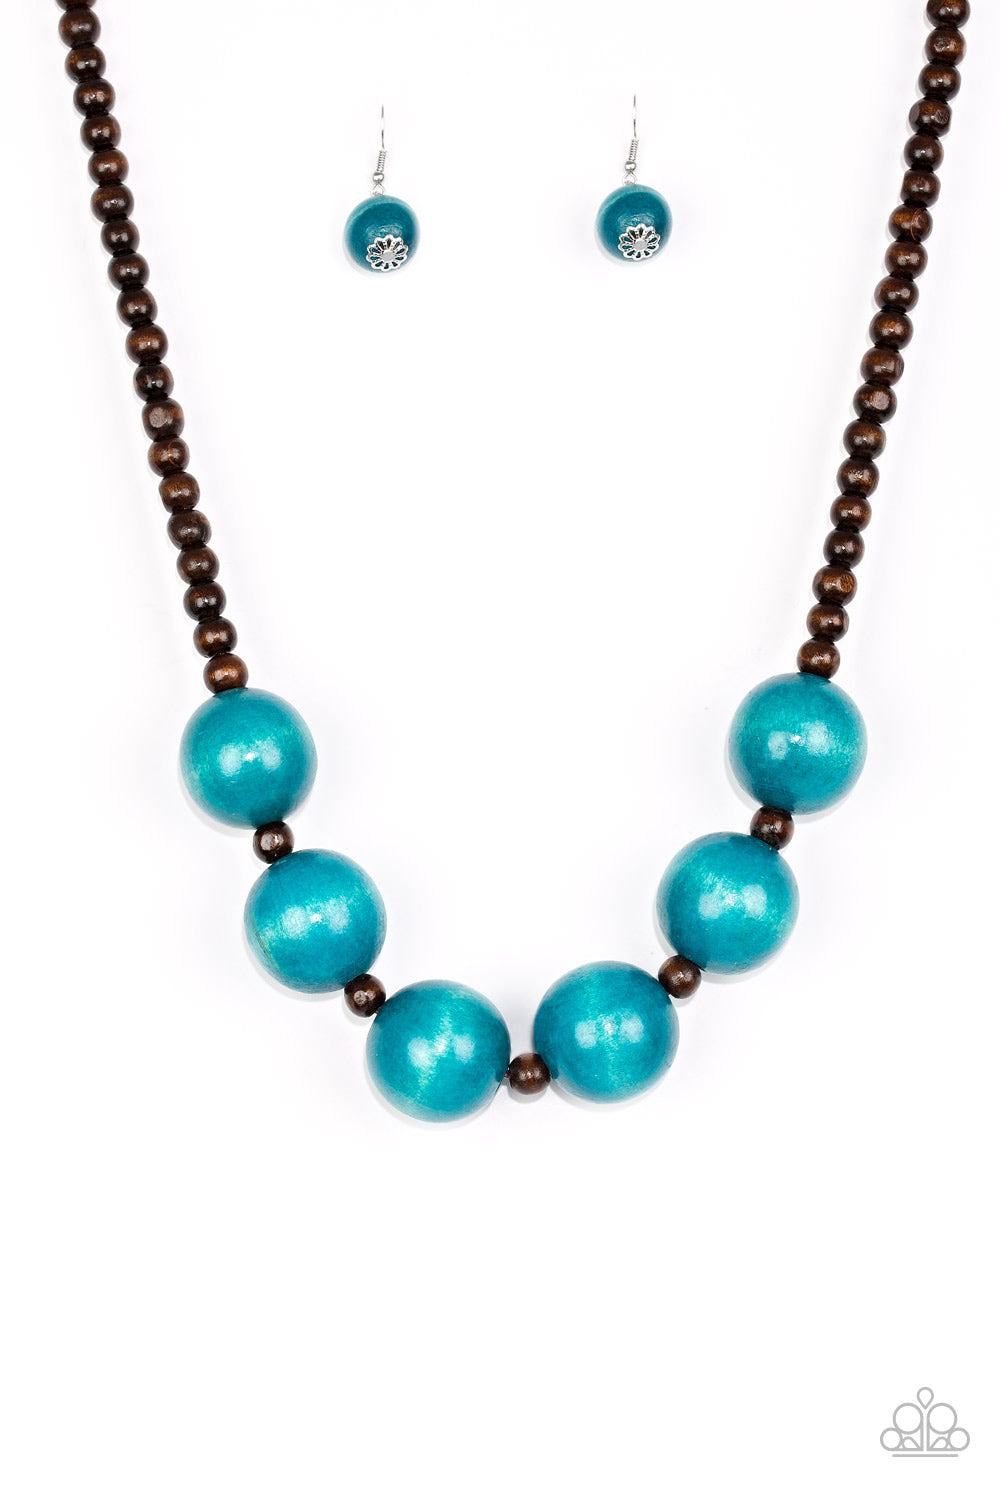 Oh My Miami Blue
Wooden Necklace - Daria's Blings N Things